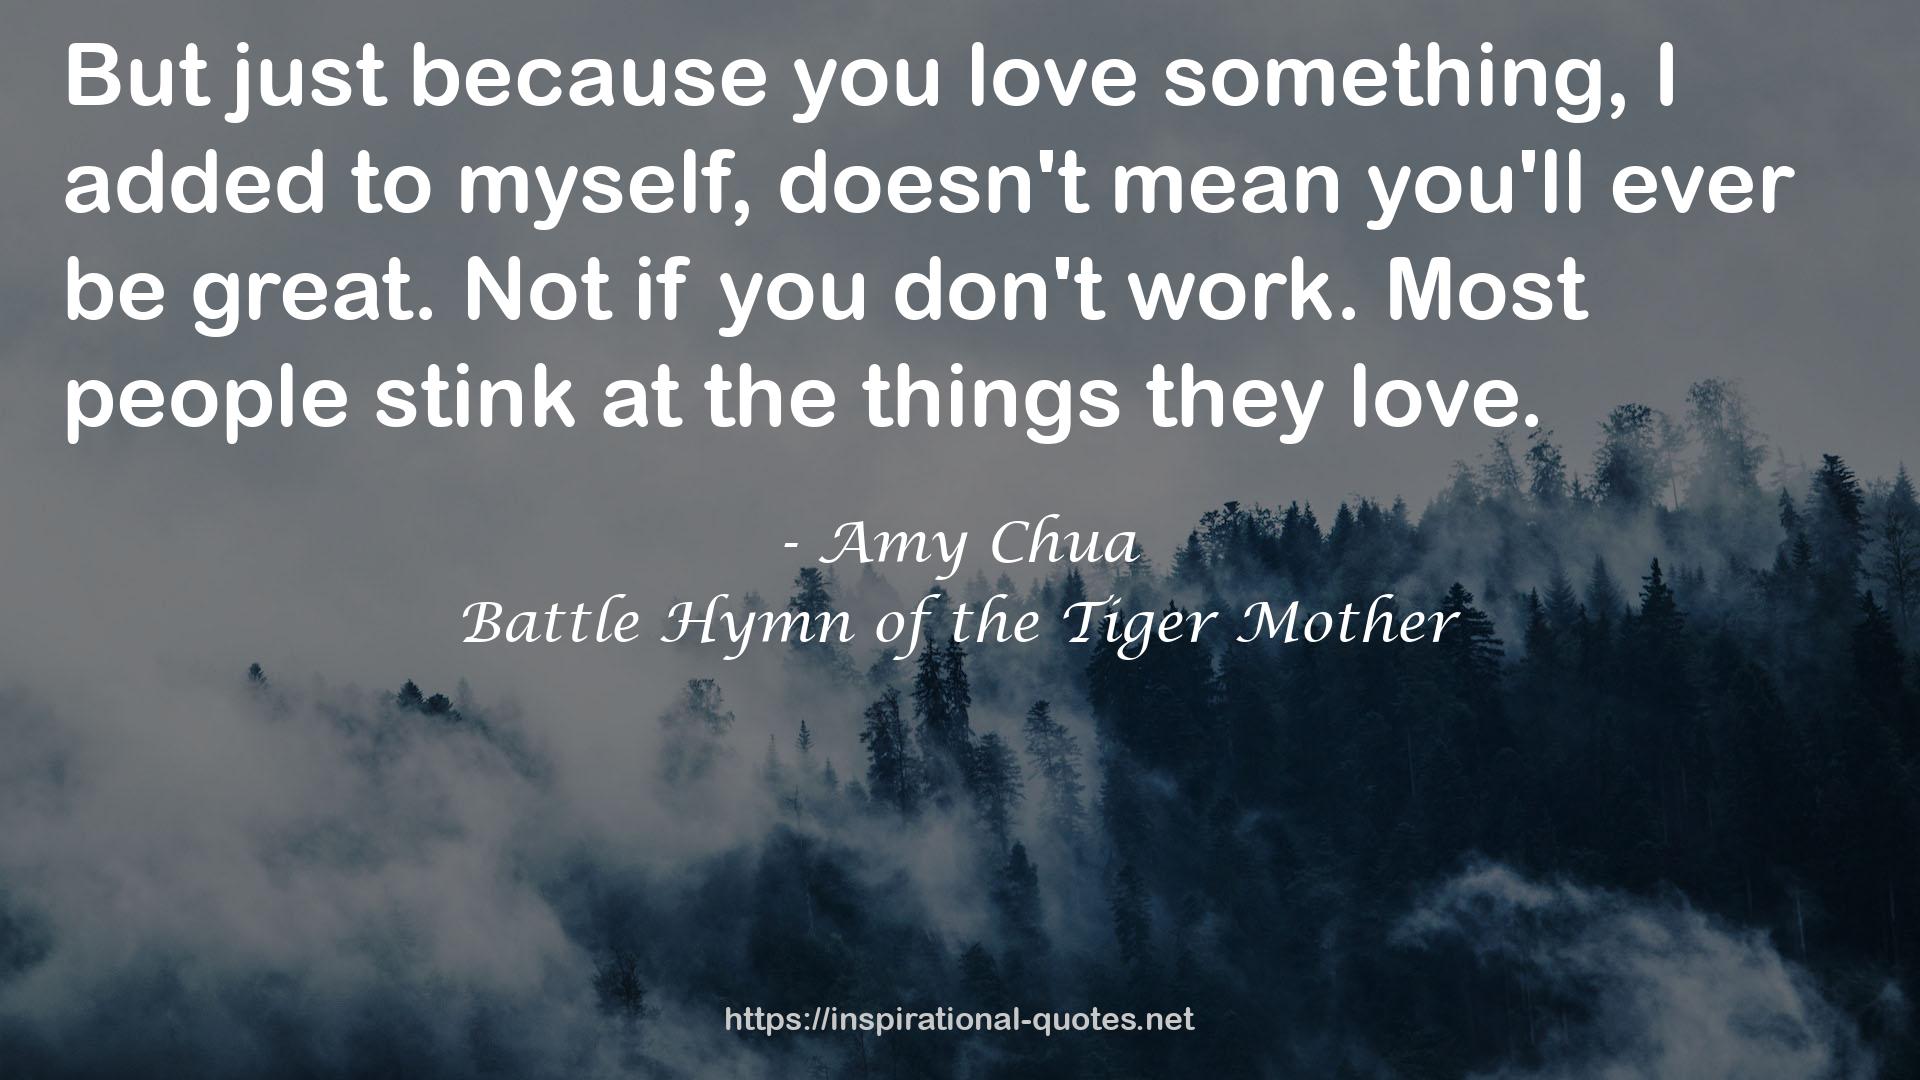 Battle Hymn of the Tiger Mother QUOTES